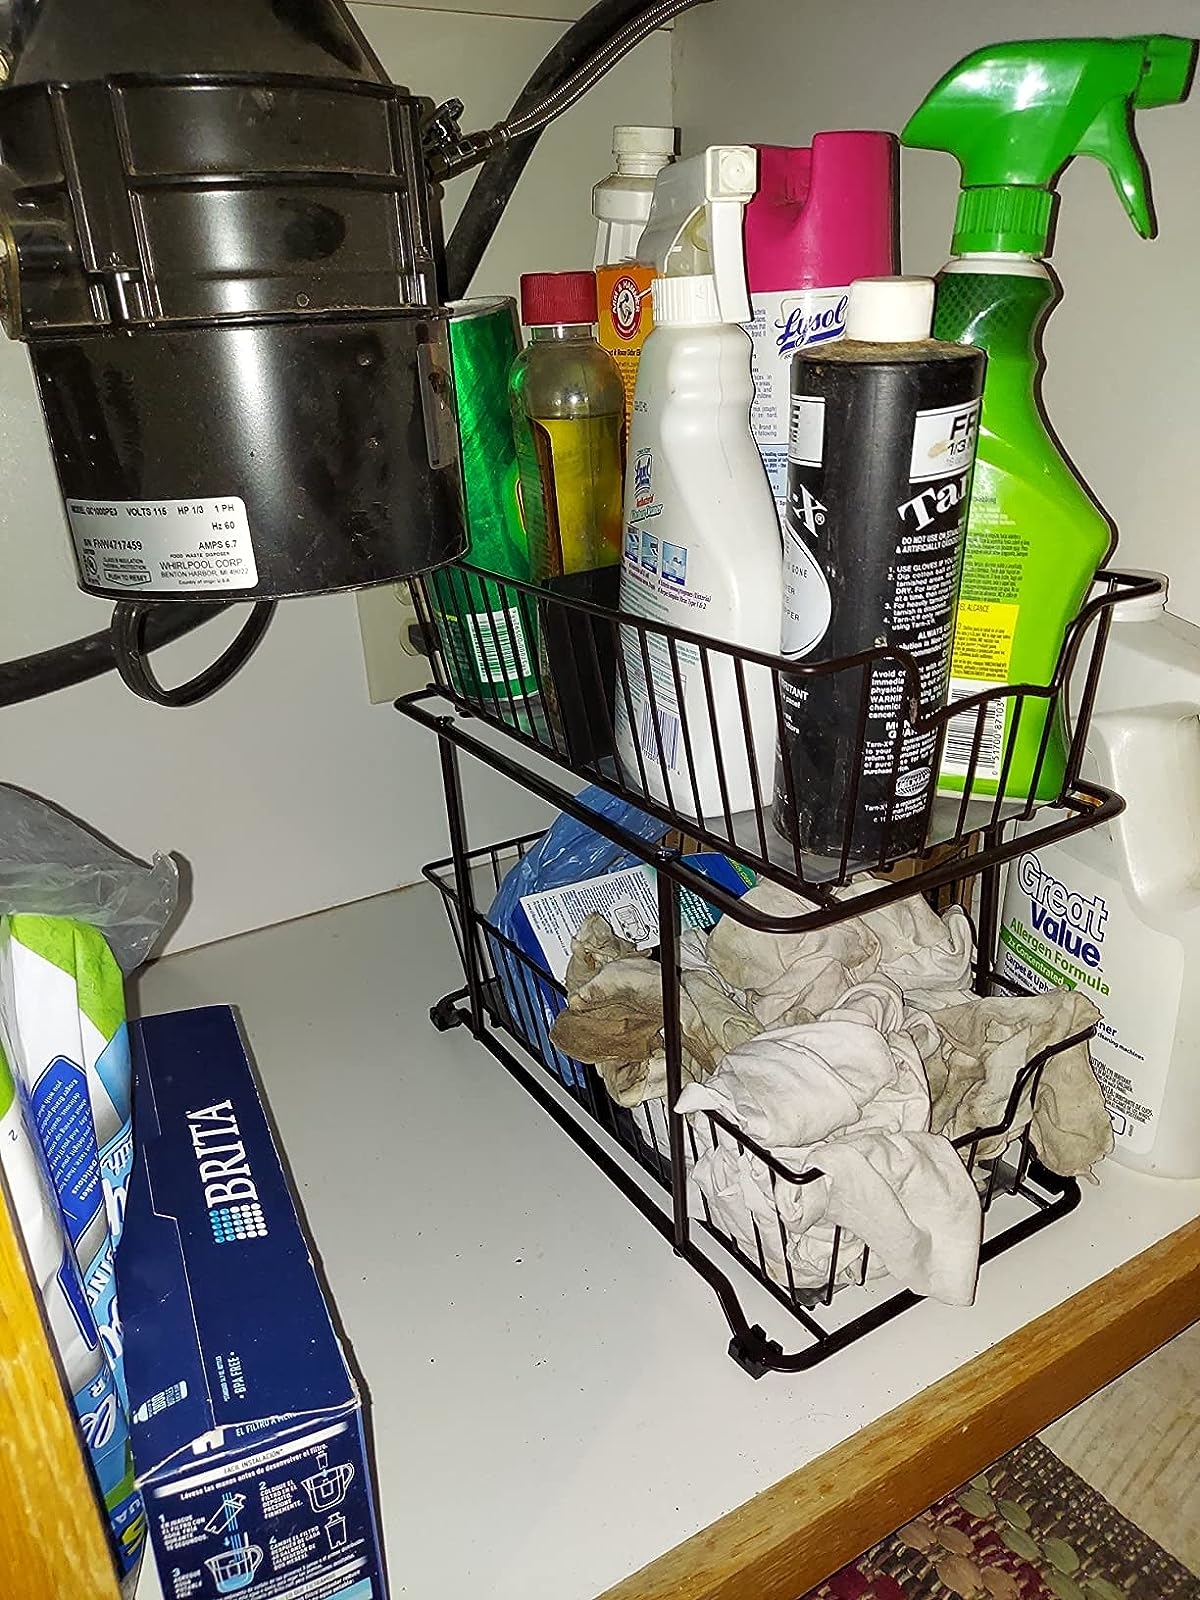 Reviewer image of cleaning supplies inside the wire organizer in a cabinet